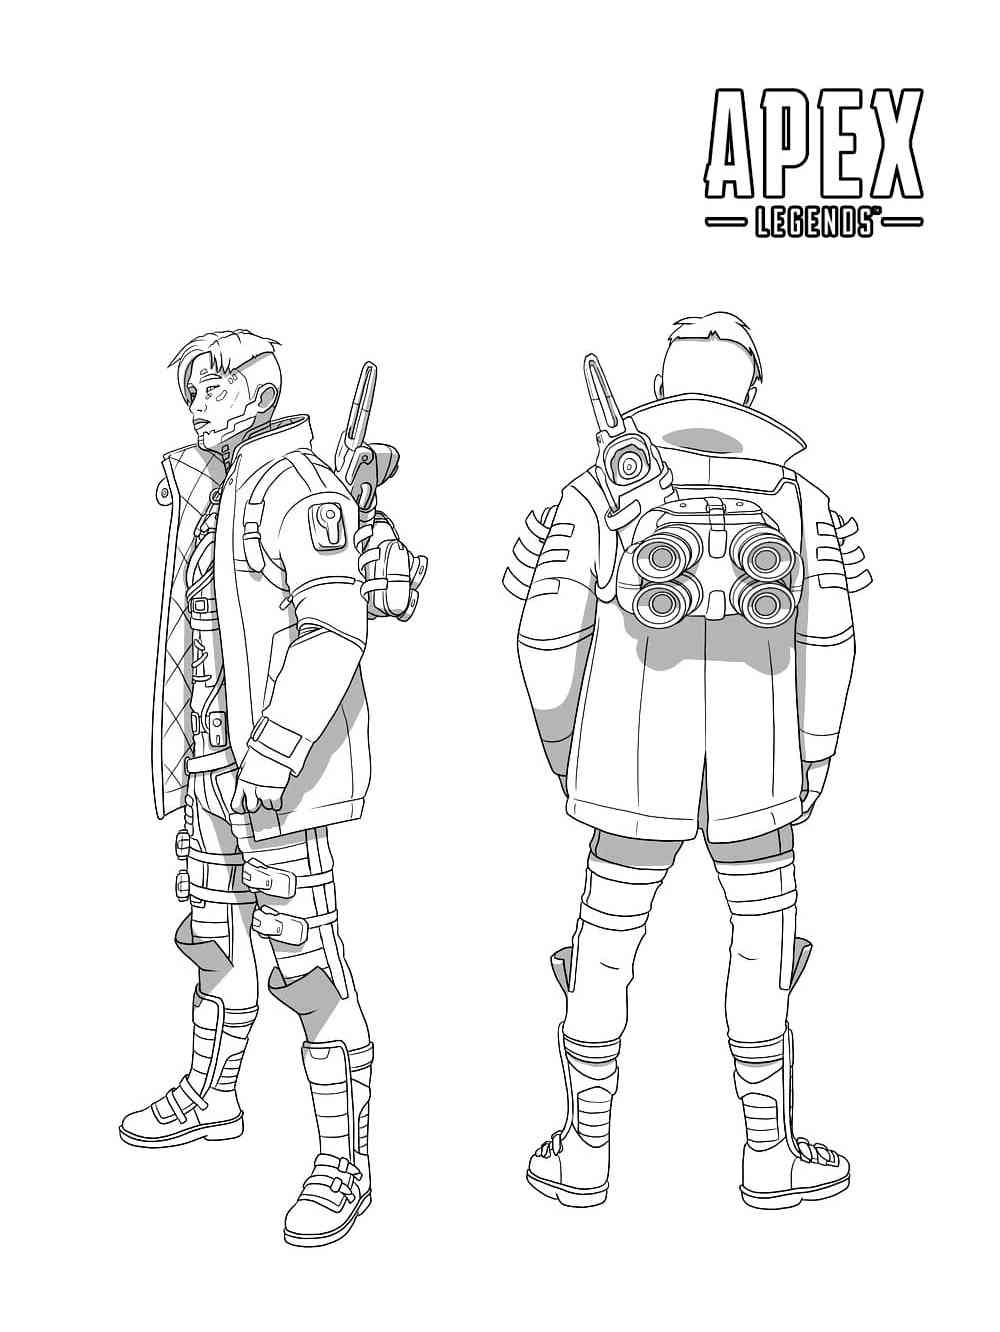 Crypto from Apex Legends coloring page